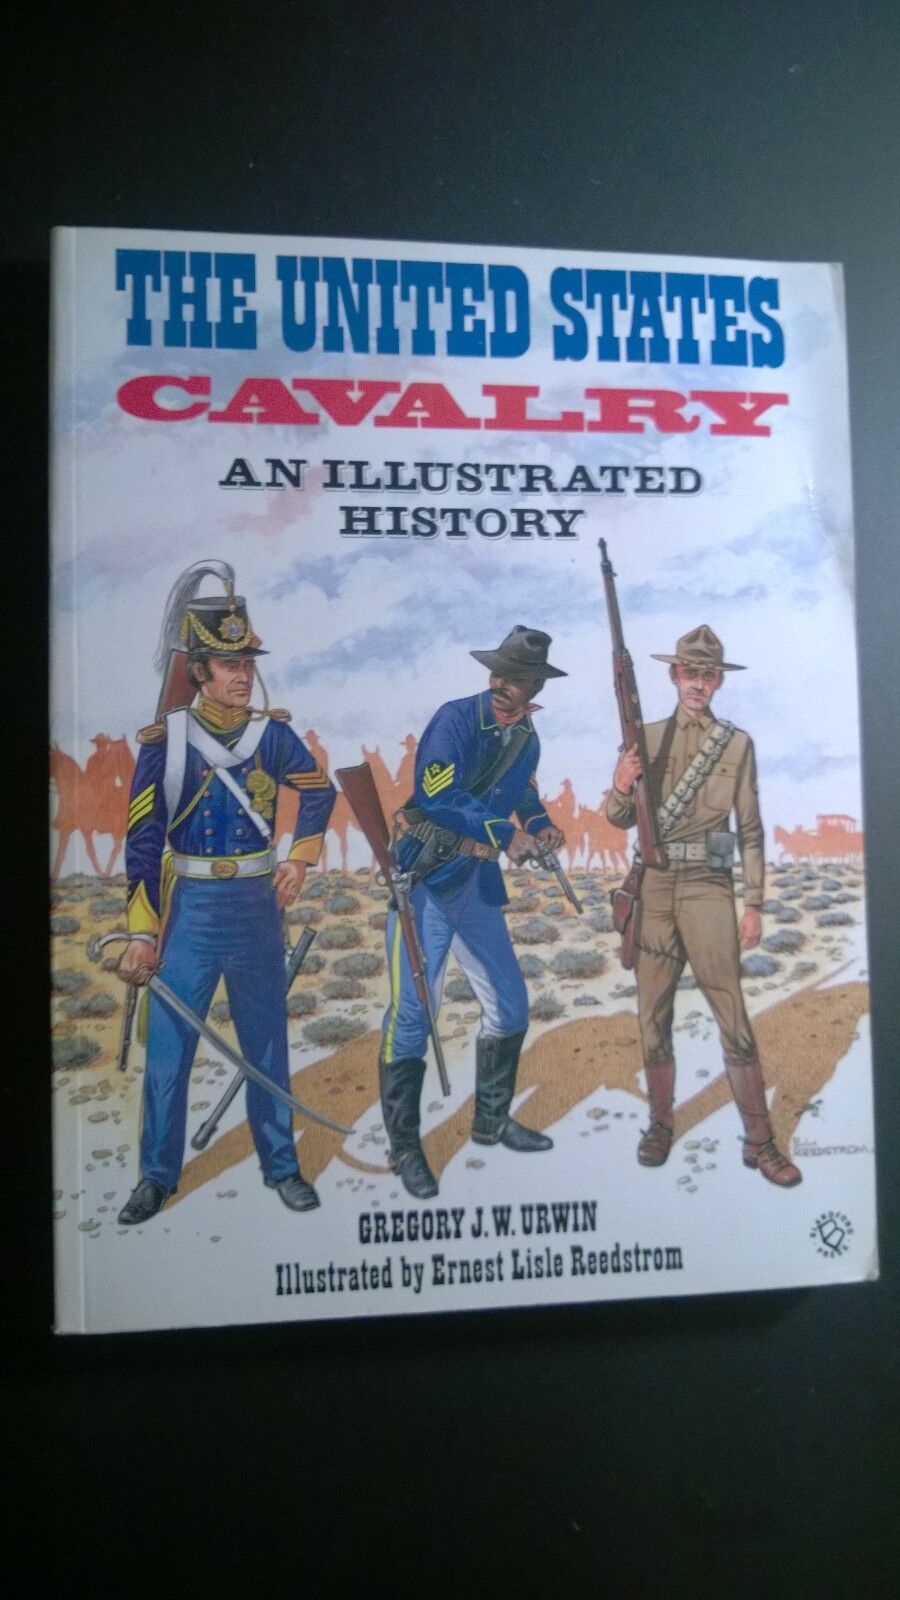 THE UNITED STATES CAVALRY - Urwin, Gregory J.W.. Illus. by Reedstrom, Ernest Lis